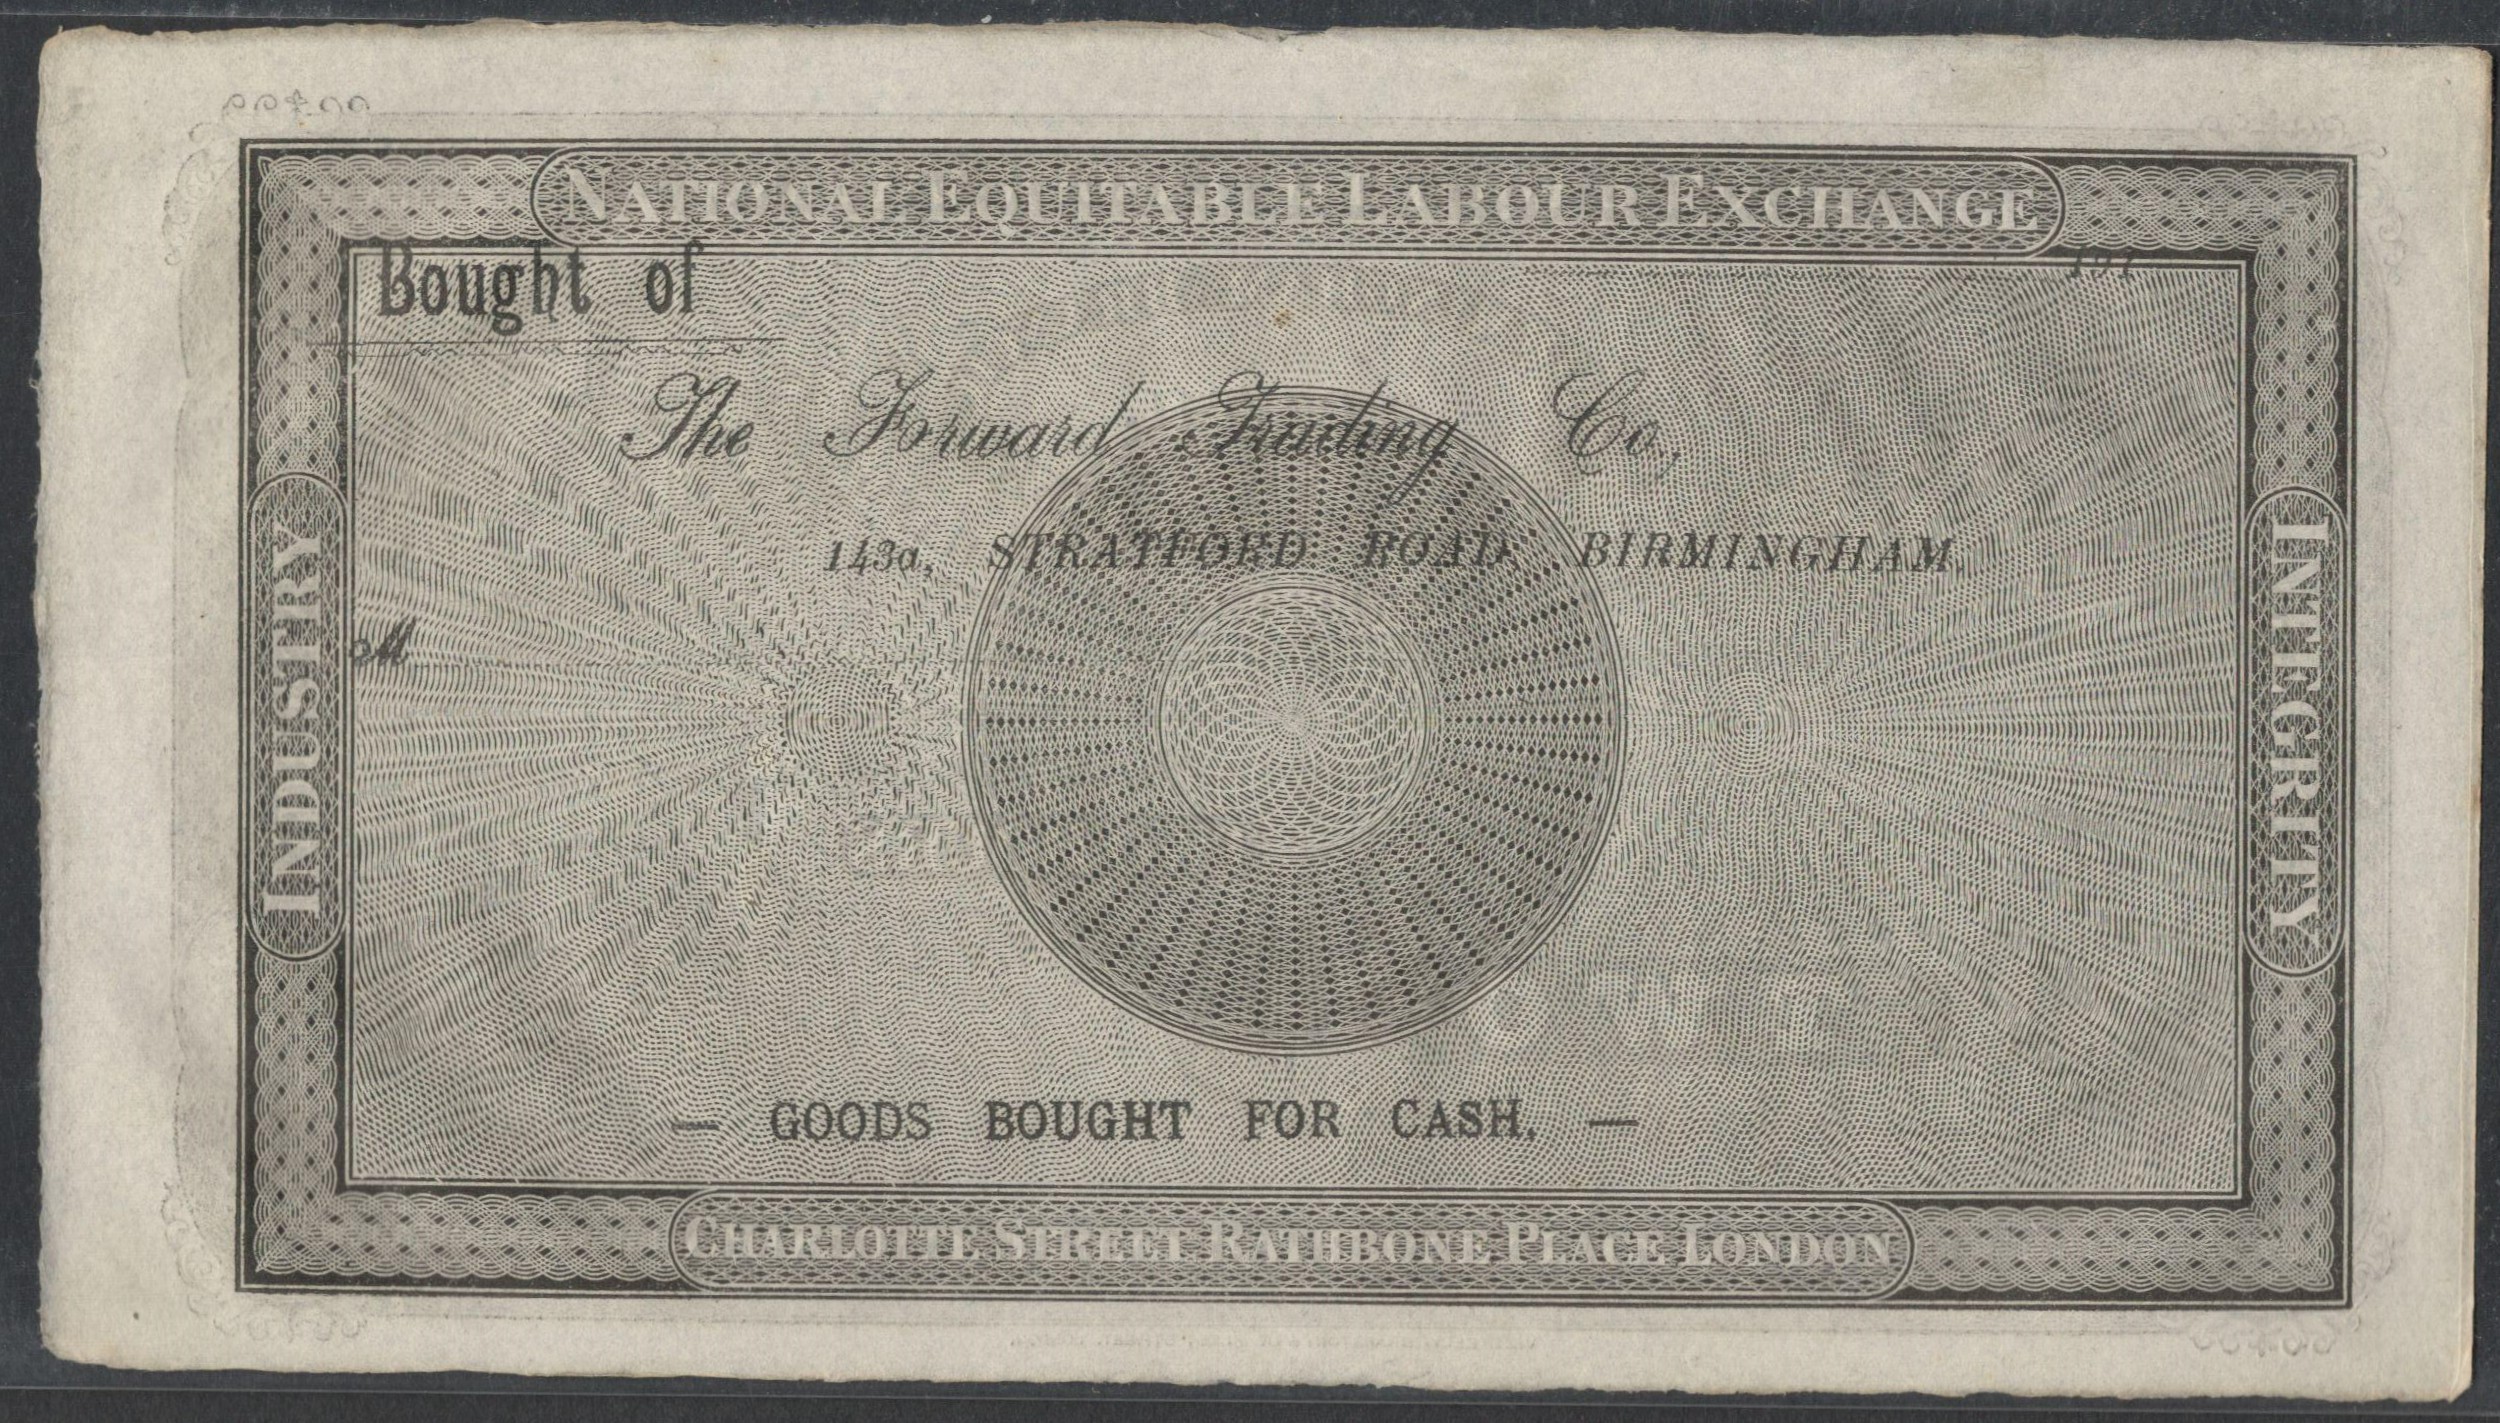 1833 ROBERT OWEN TWO HOURS NOTE - NATIONAL EQUITABLE LABOUR EXCHANGE IN ACCEPTABLE CONDITION - Image 2 of 2